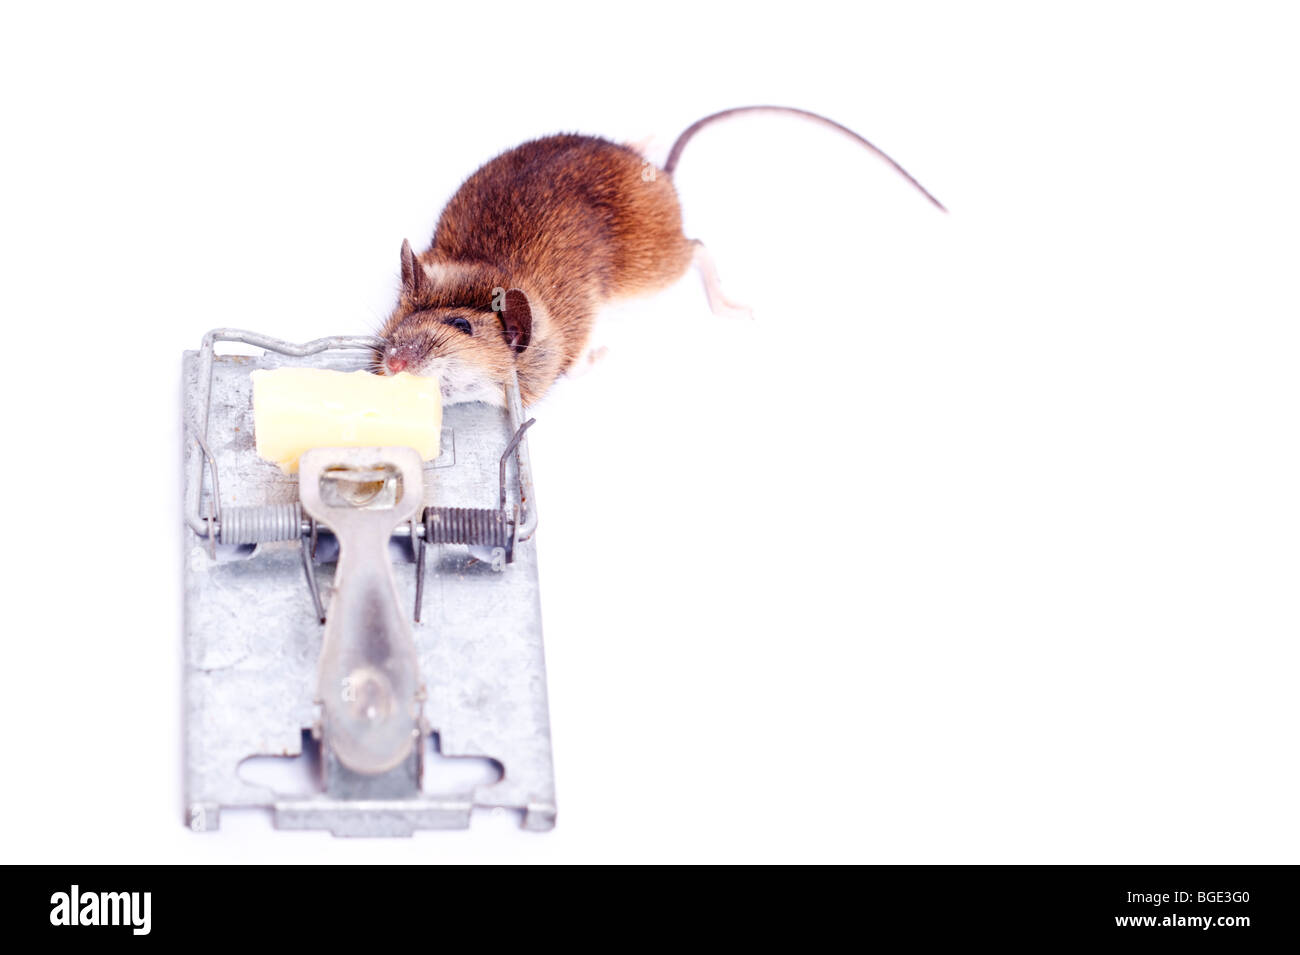 A dead mouse after having been caught in a mouse trap on a white background Stock Photo